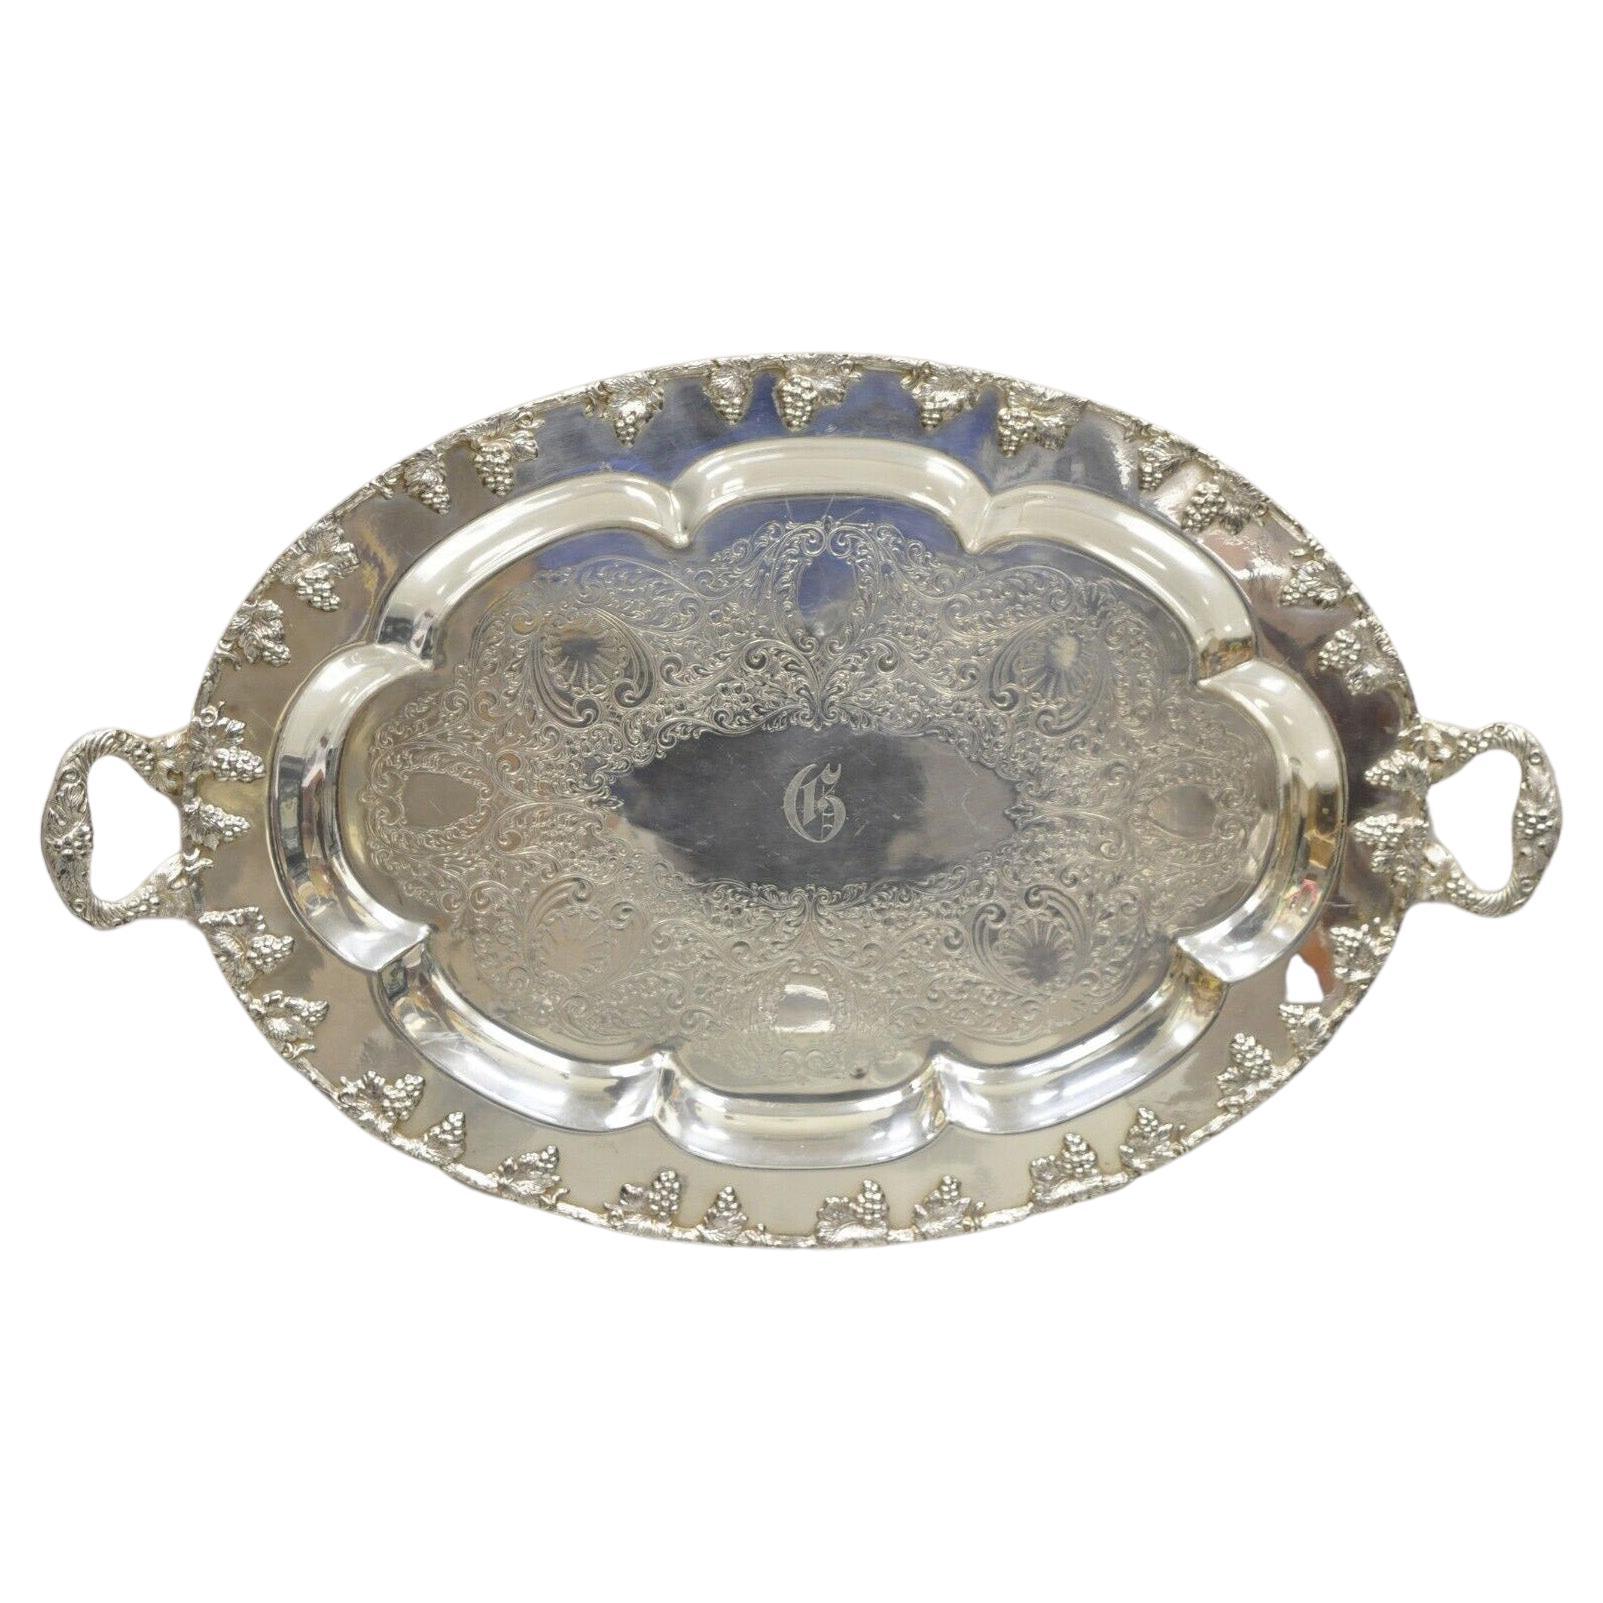 English Victorian Regency Silver Plate Oval Grapevine Platter Tray with Monogram